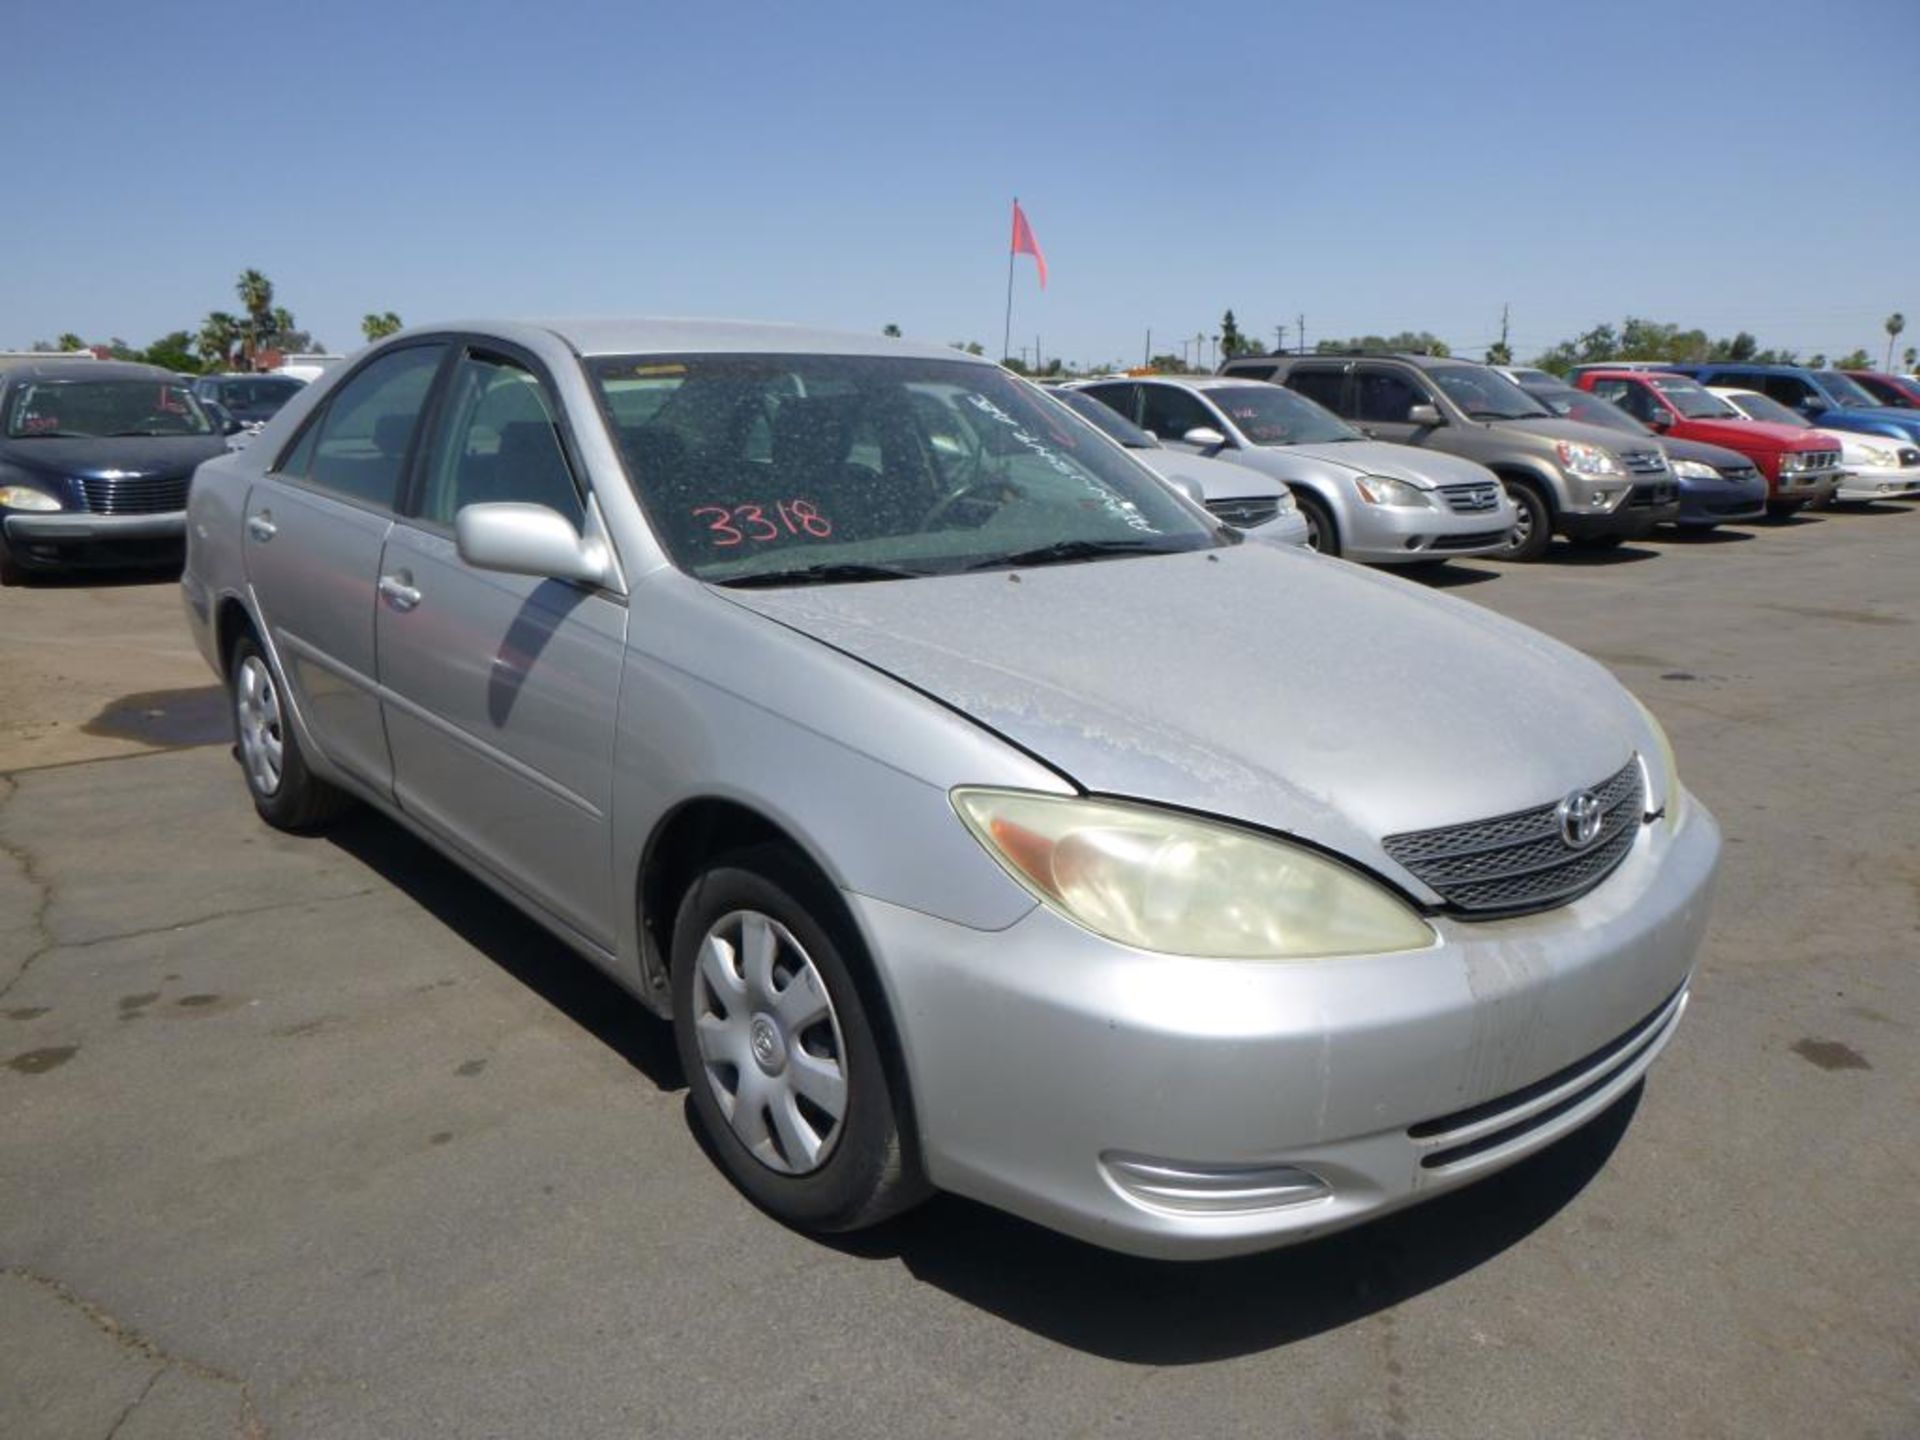 2004 Toyota Camry - Image 4 of 13